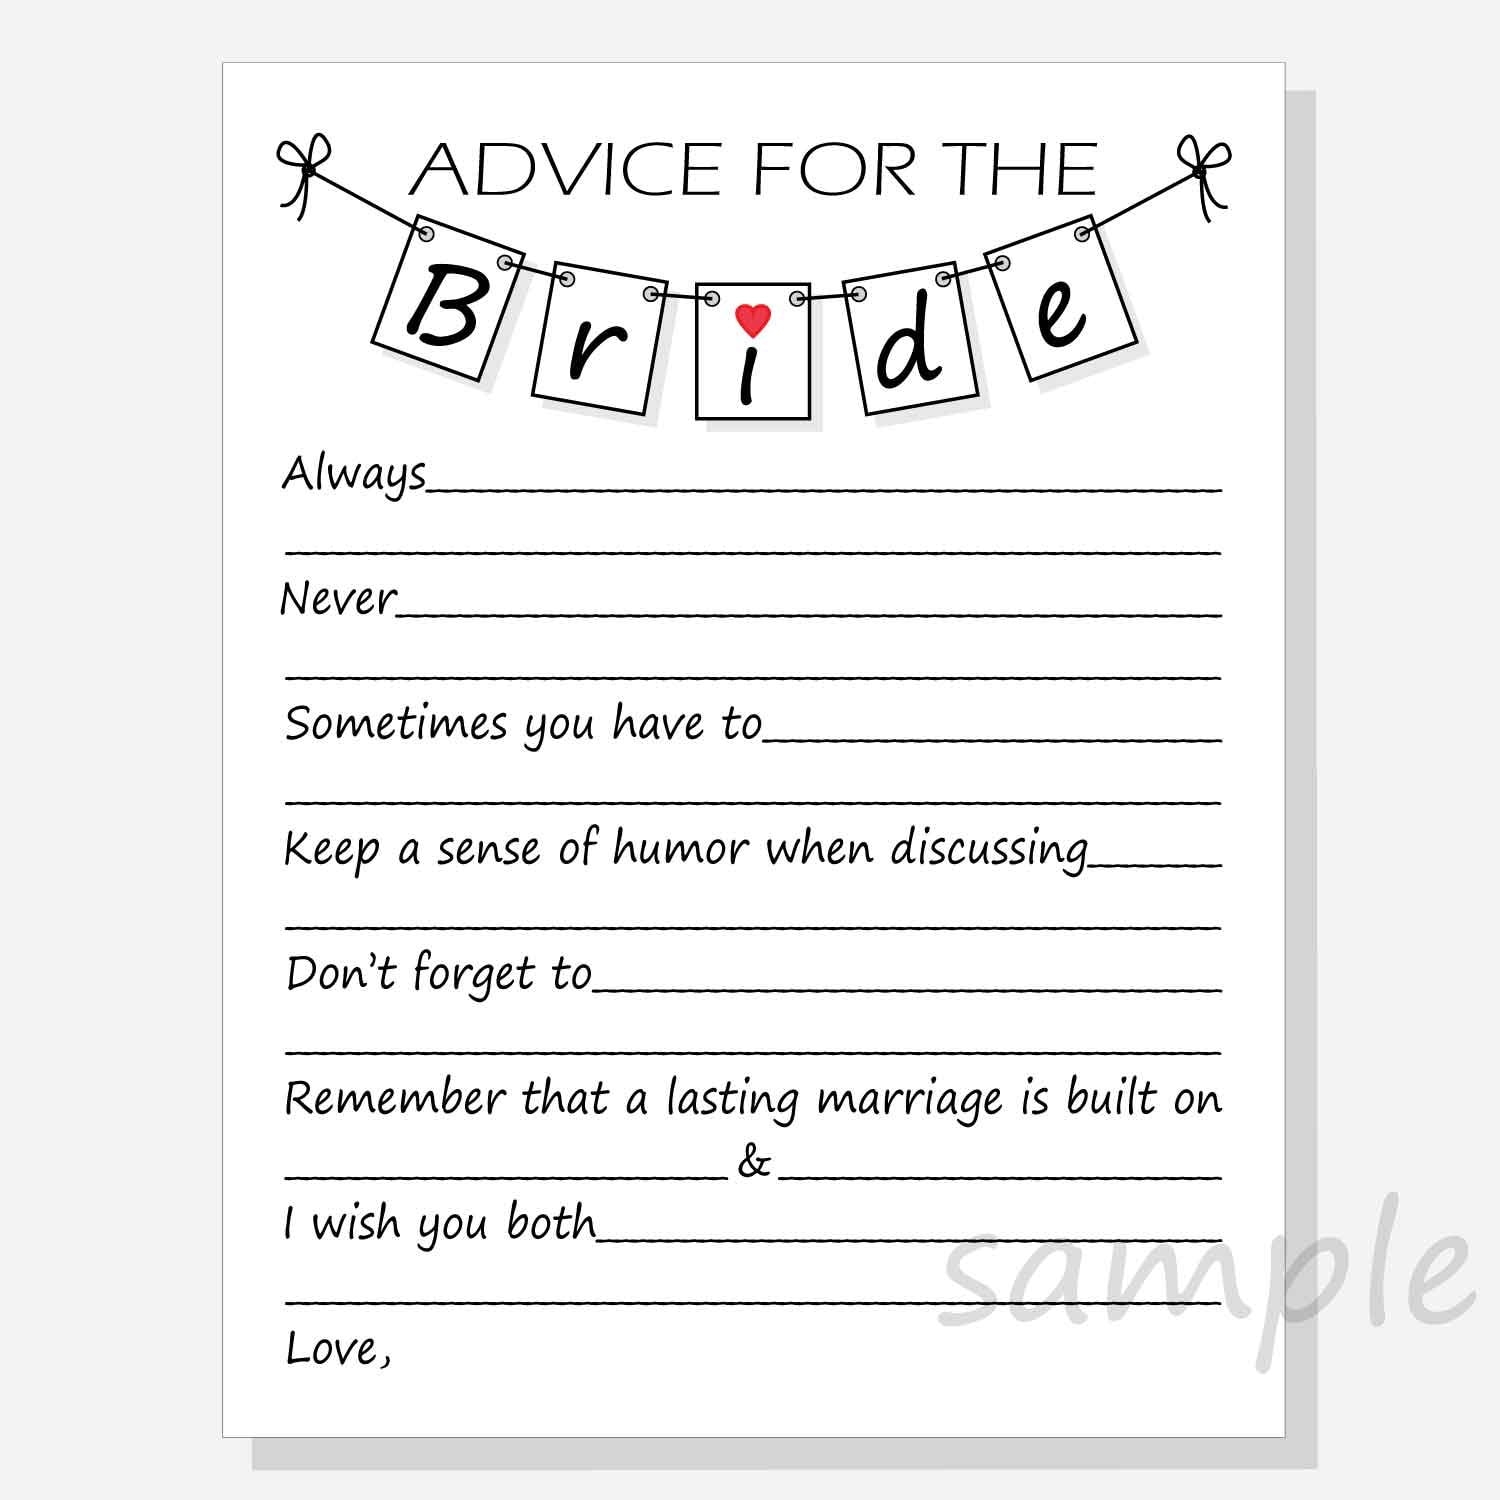 DIY Advice For The Bride Printable Cards For A Bridal Shower Pennant Design Always Never Etc With Red And Hot Pink Hearts Etsy - Free Printable Bridal Shower Advice Cards